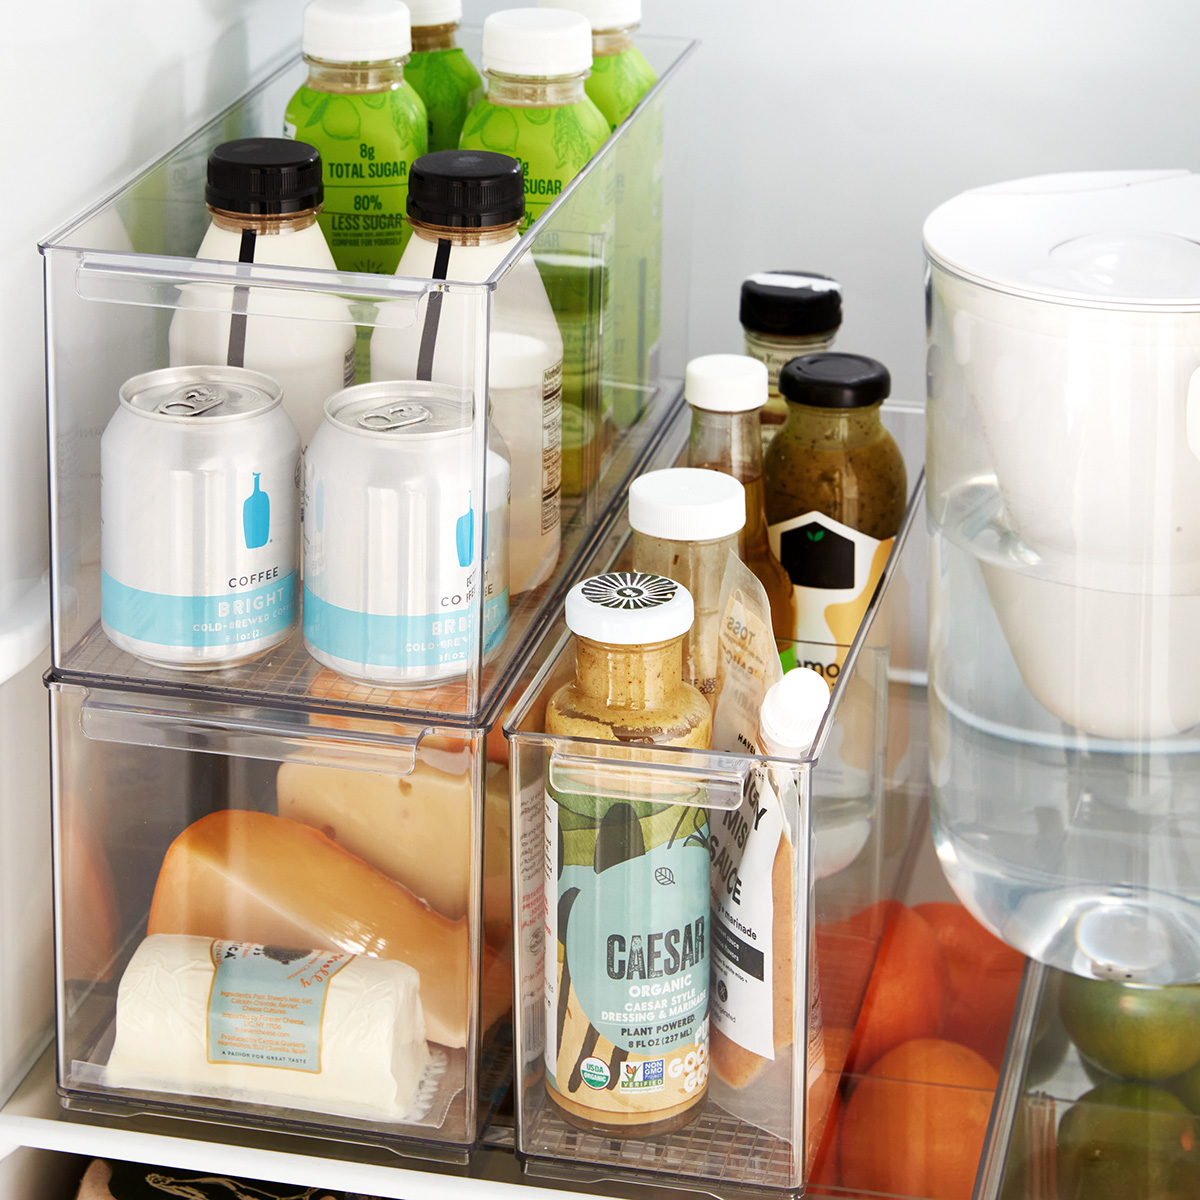 https://www.containerstore.com/catalogimages/439731/10087162g_11in_modular_pantry_bin_fr.jpg